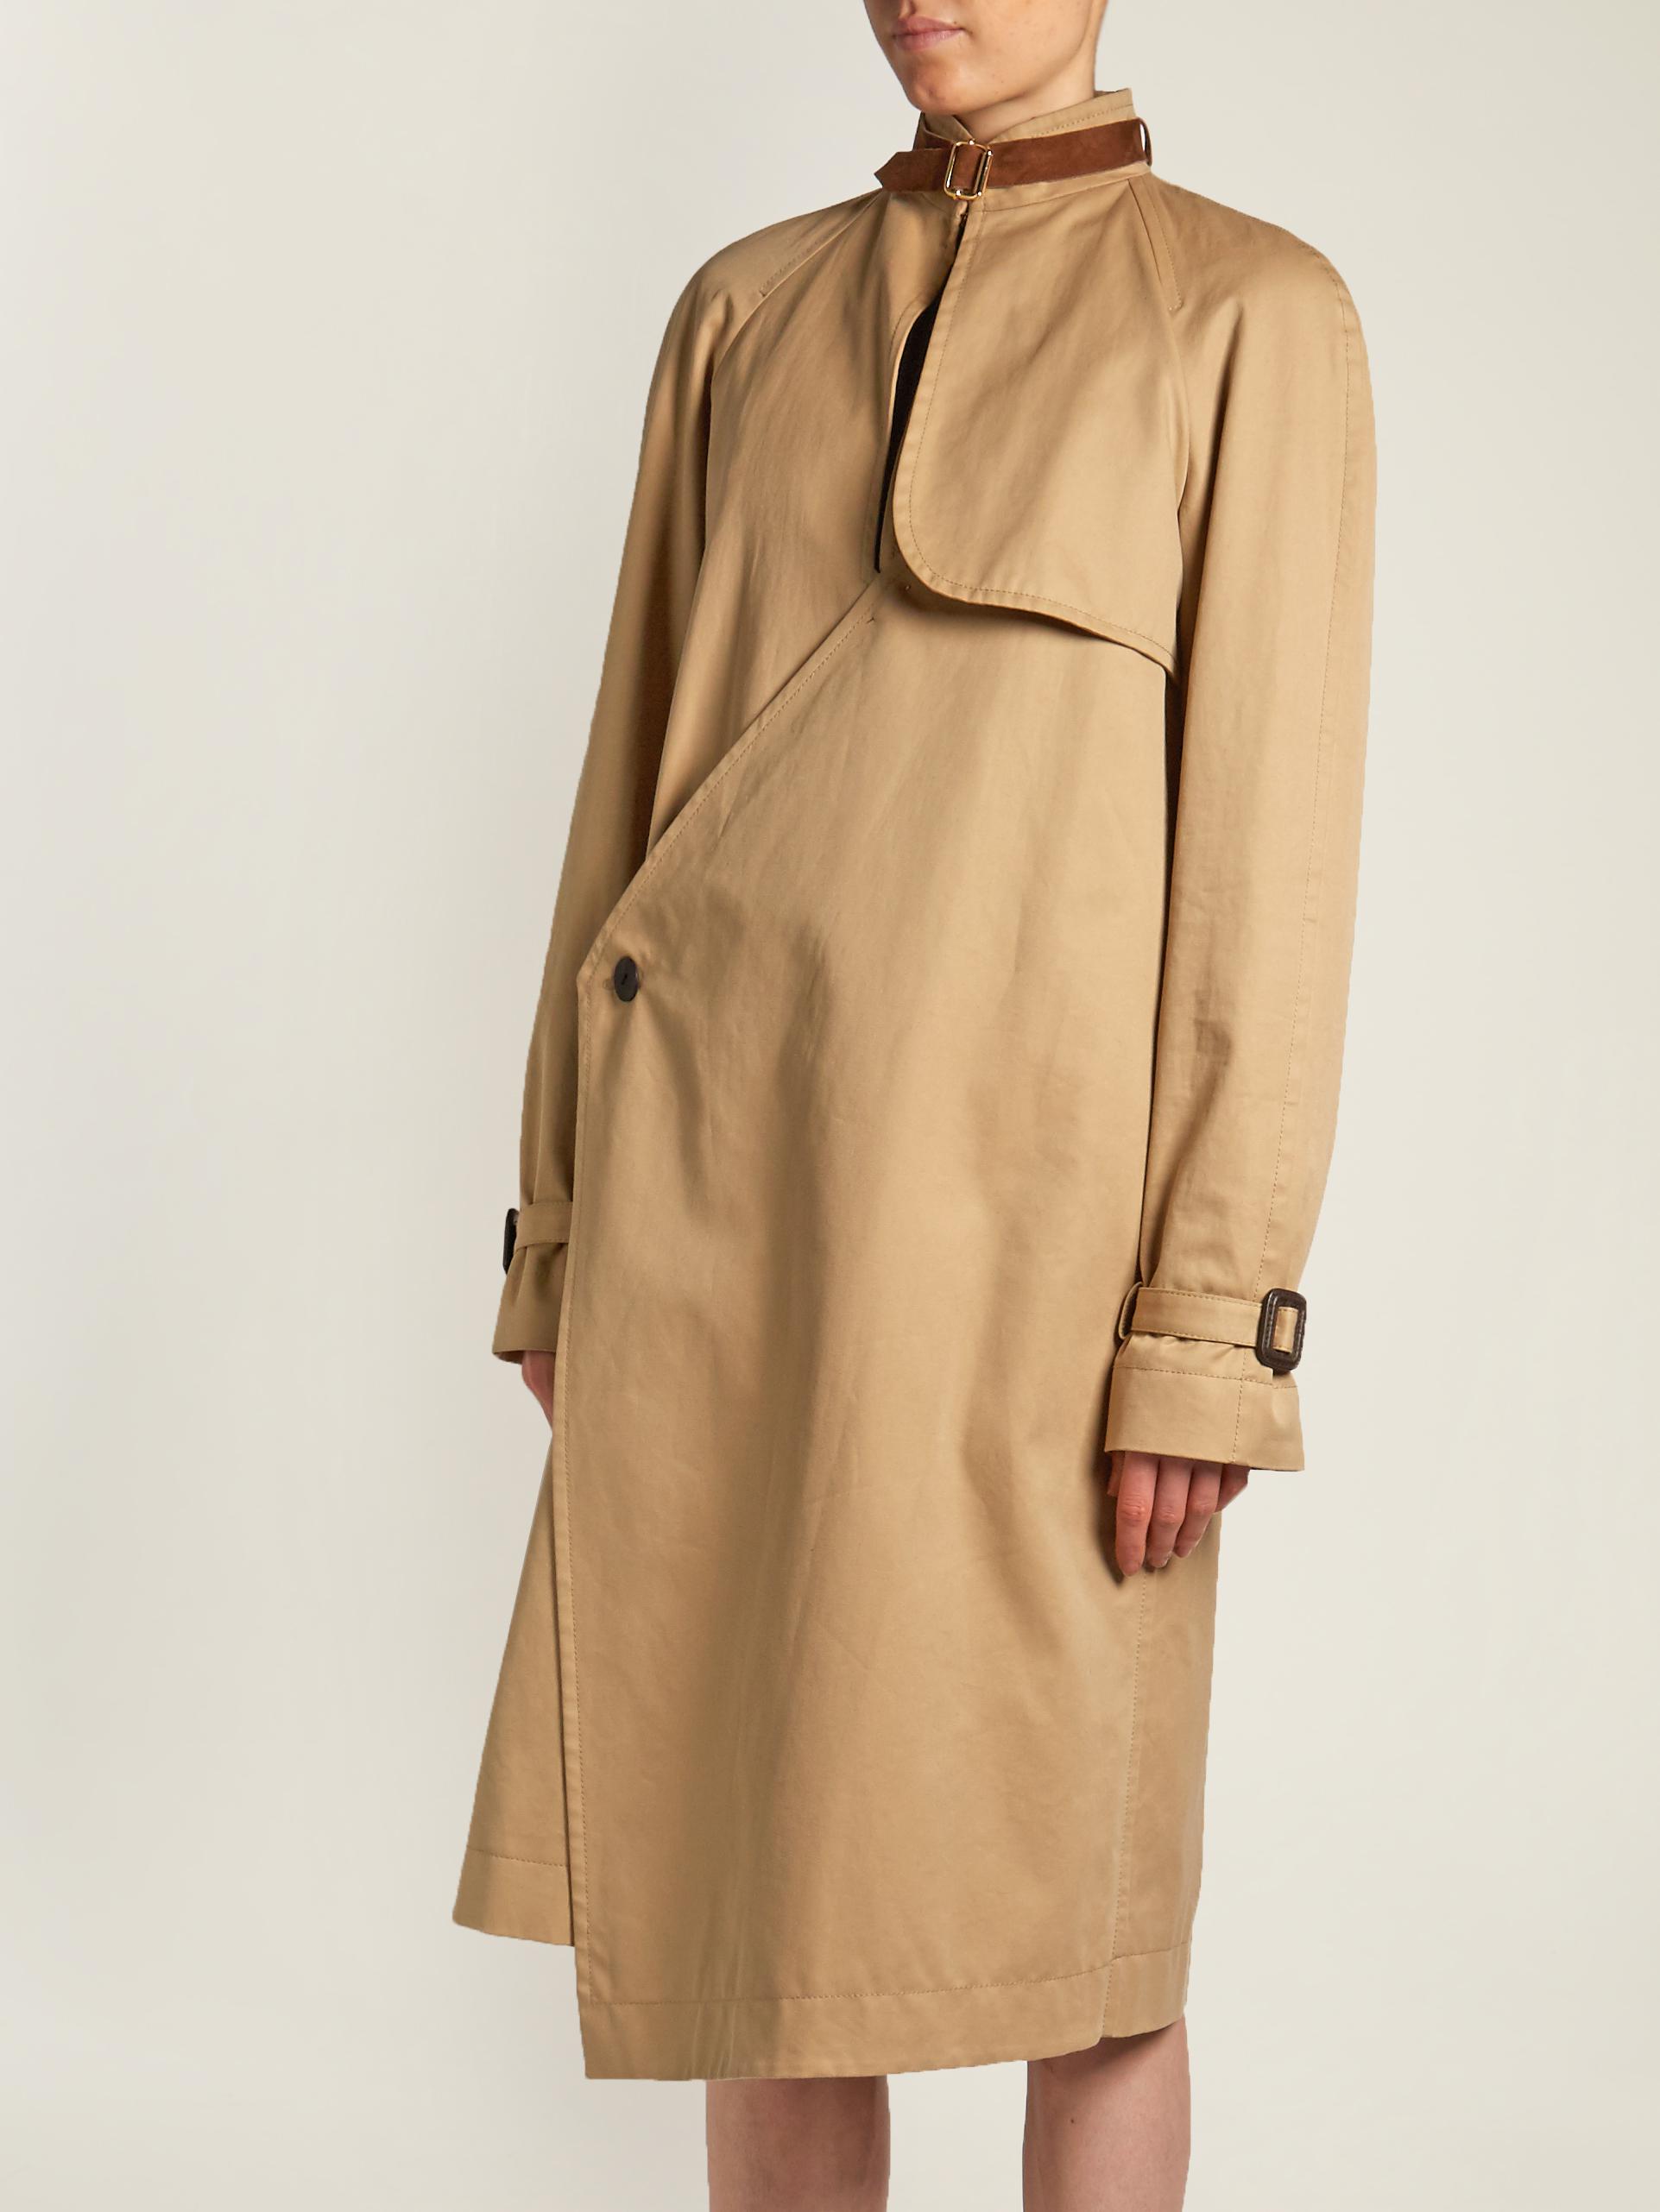 Lyst - JW Anderson Asymmetric Neck-strap Trench Coat in Natural